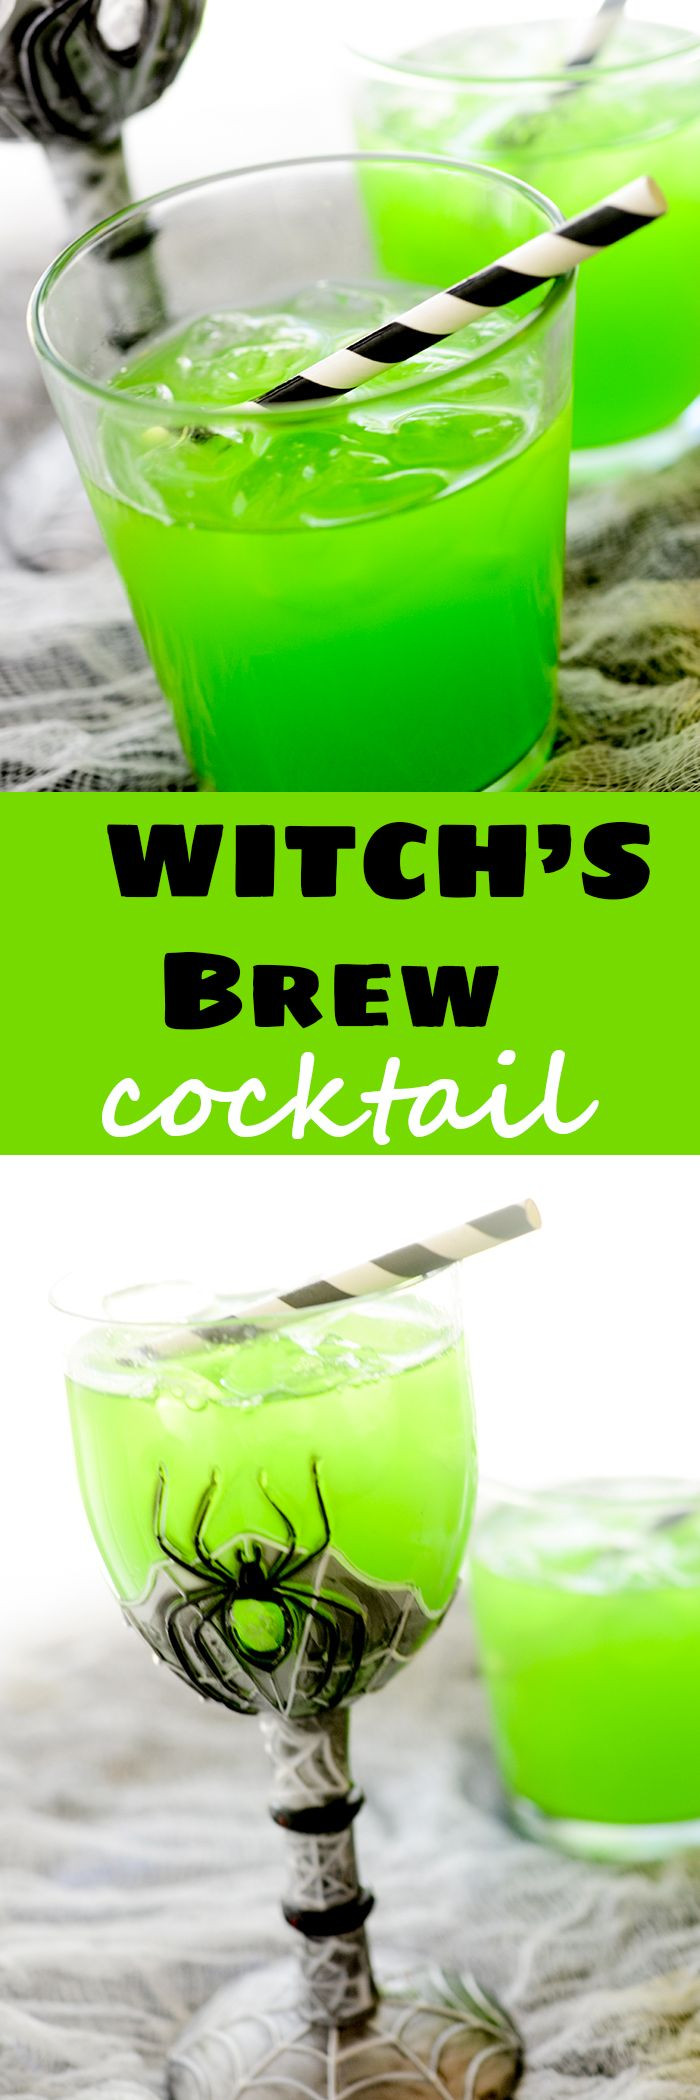 Halloween Party Drinks For Adults
 Witch s Brew Cocktail Recipe Halloween